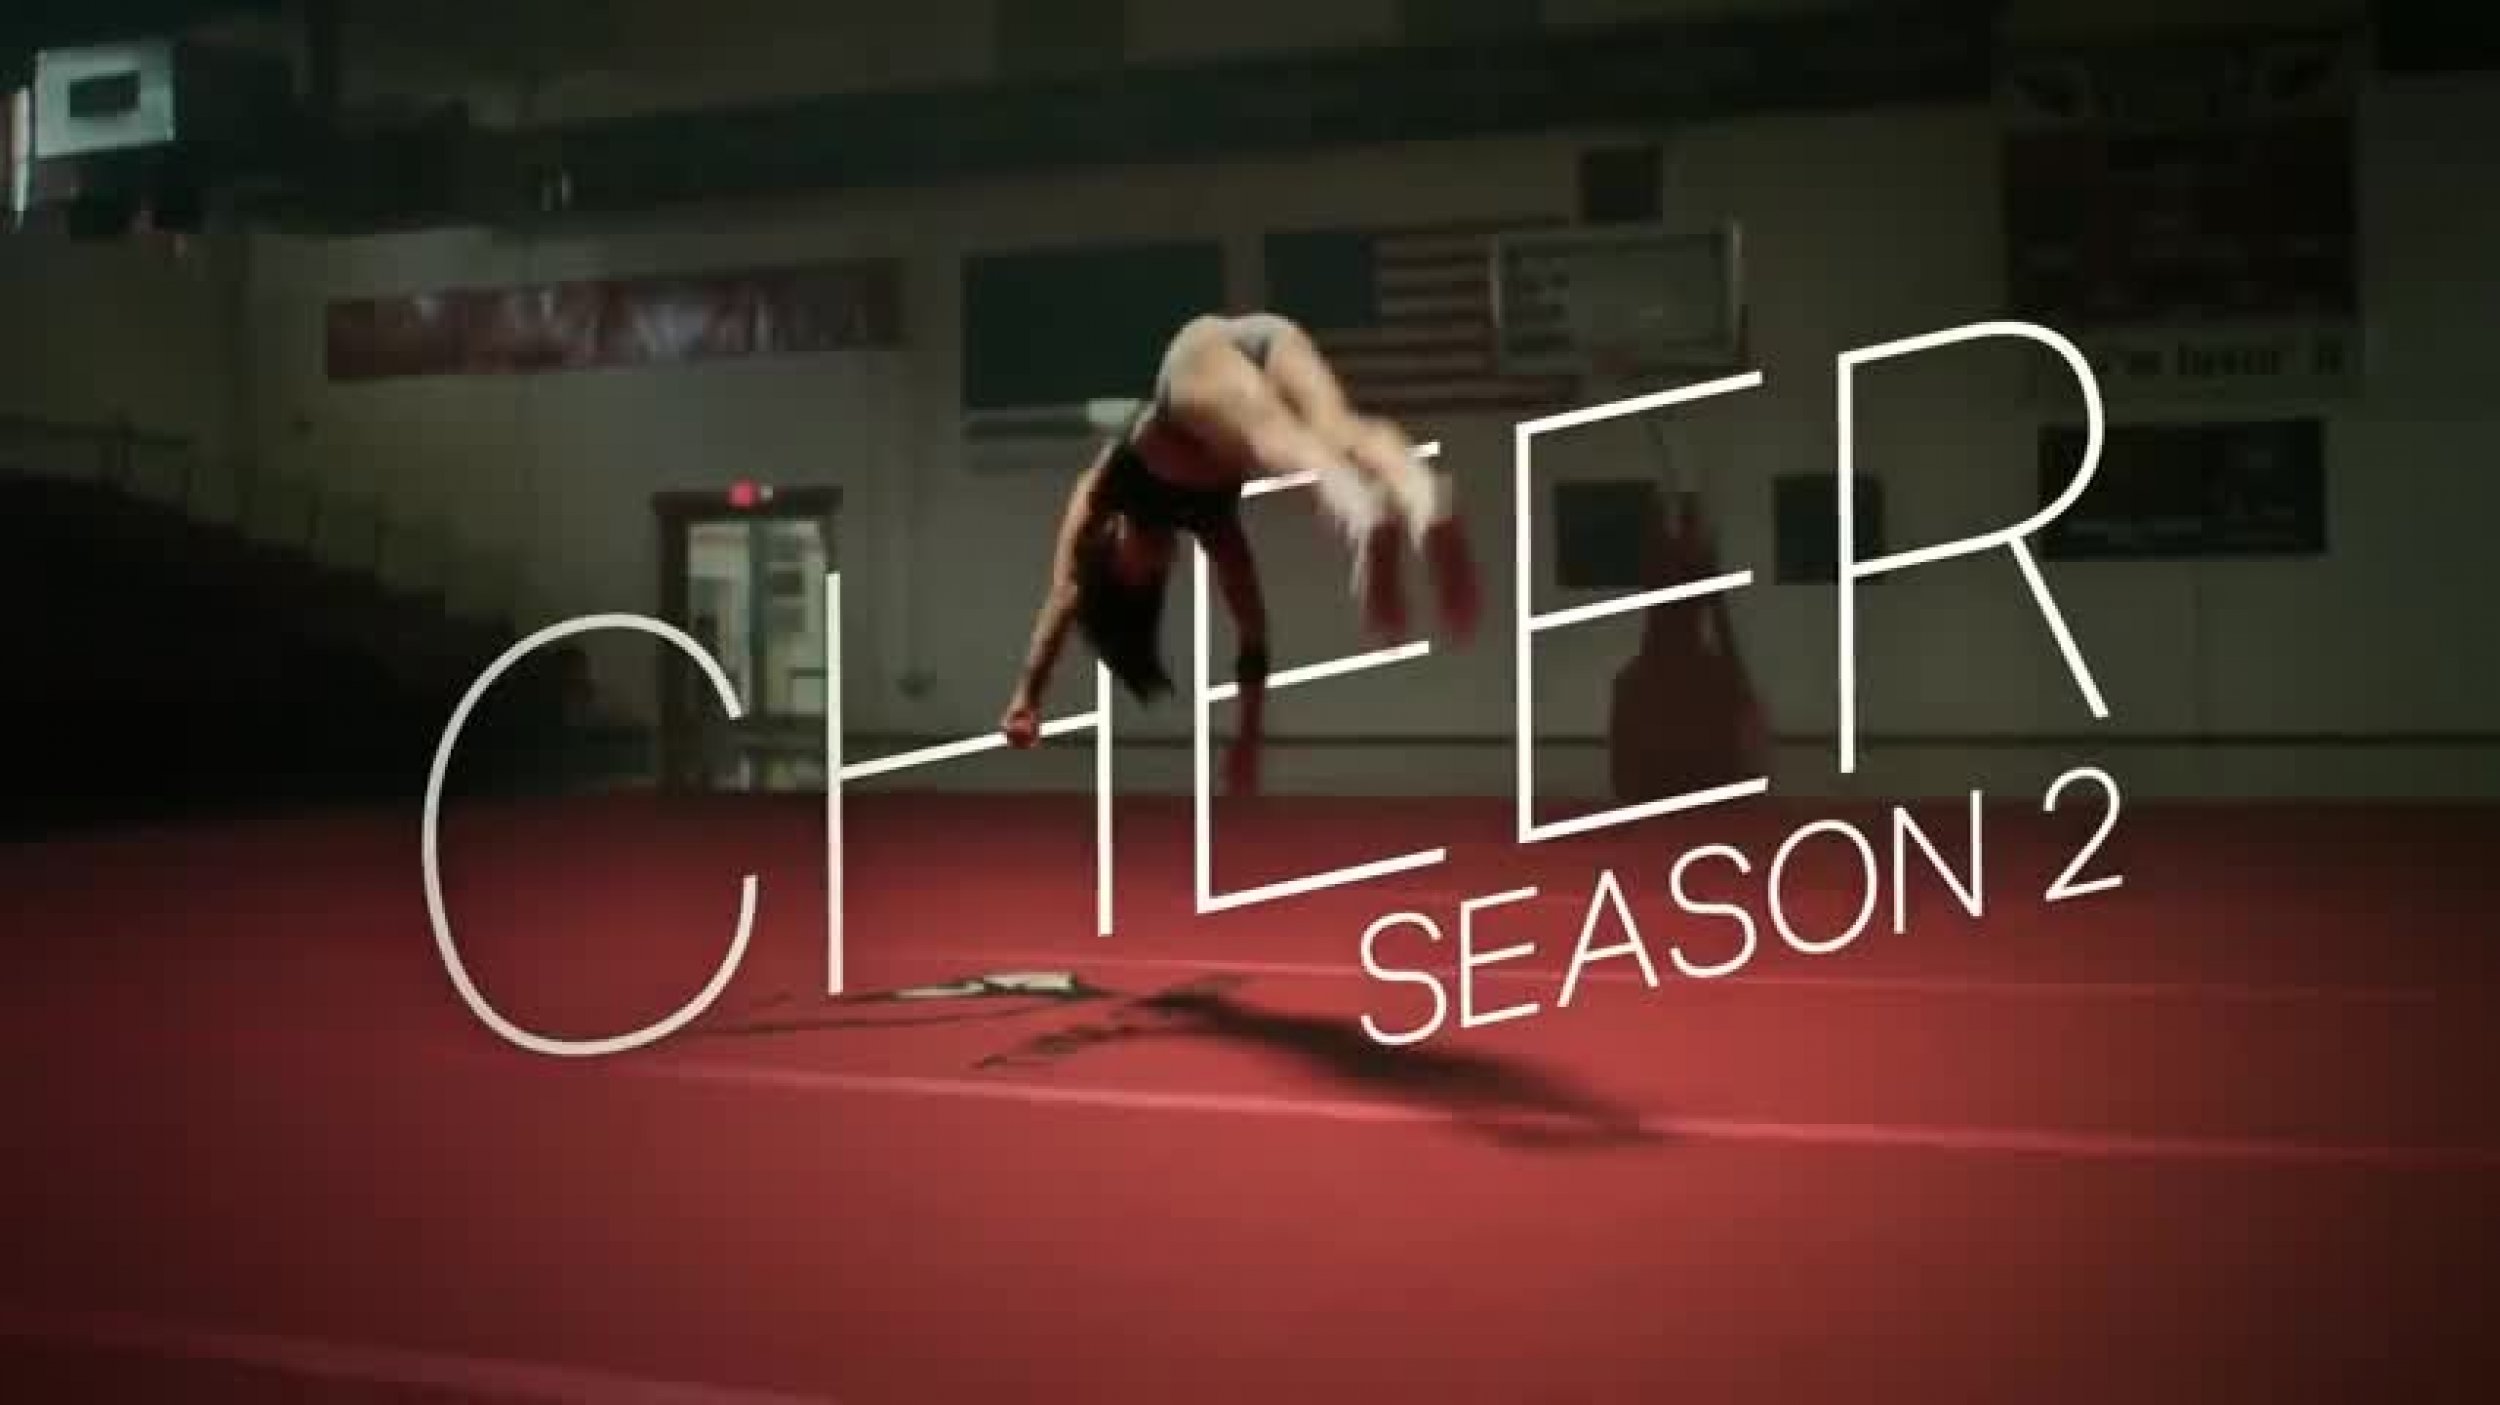 Watch The Official Trailer For Cheer Season 2 On Netflix